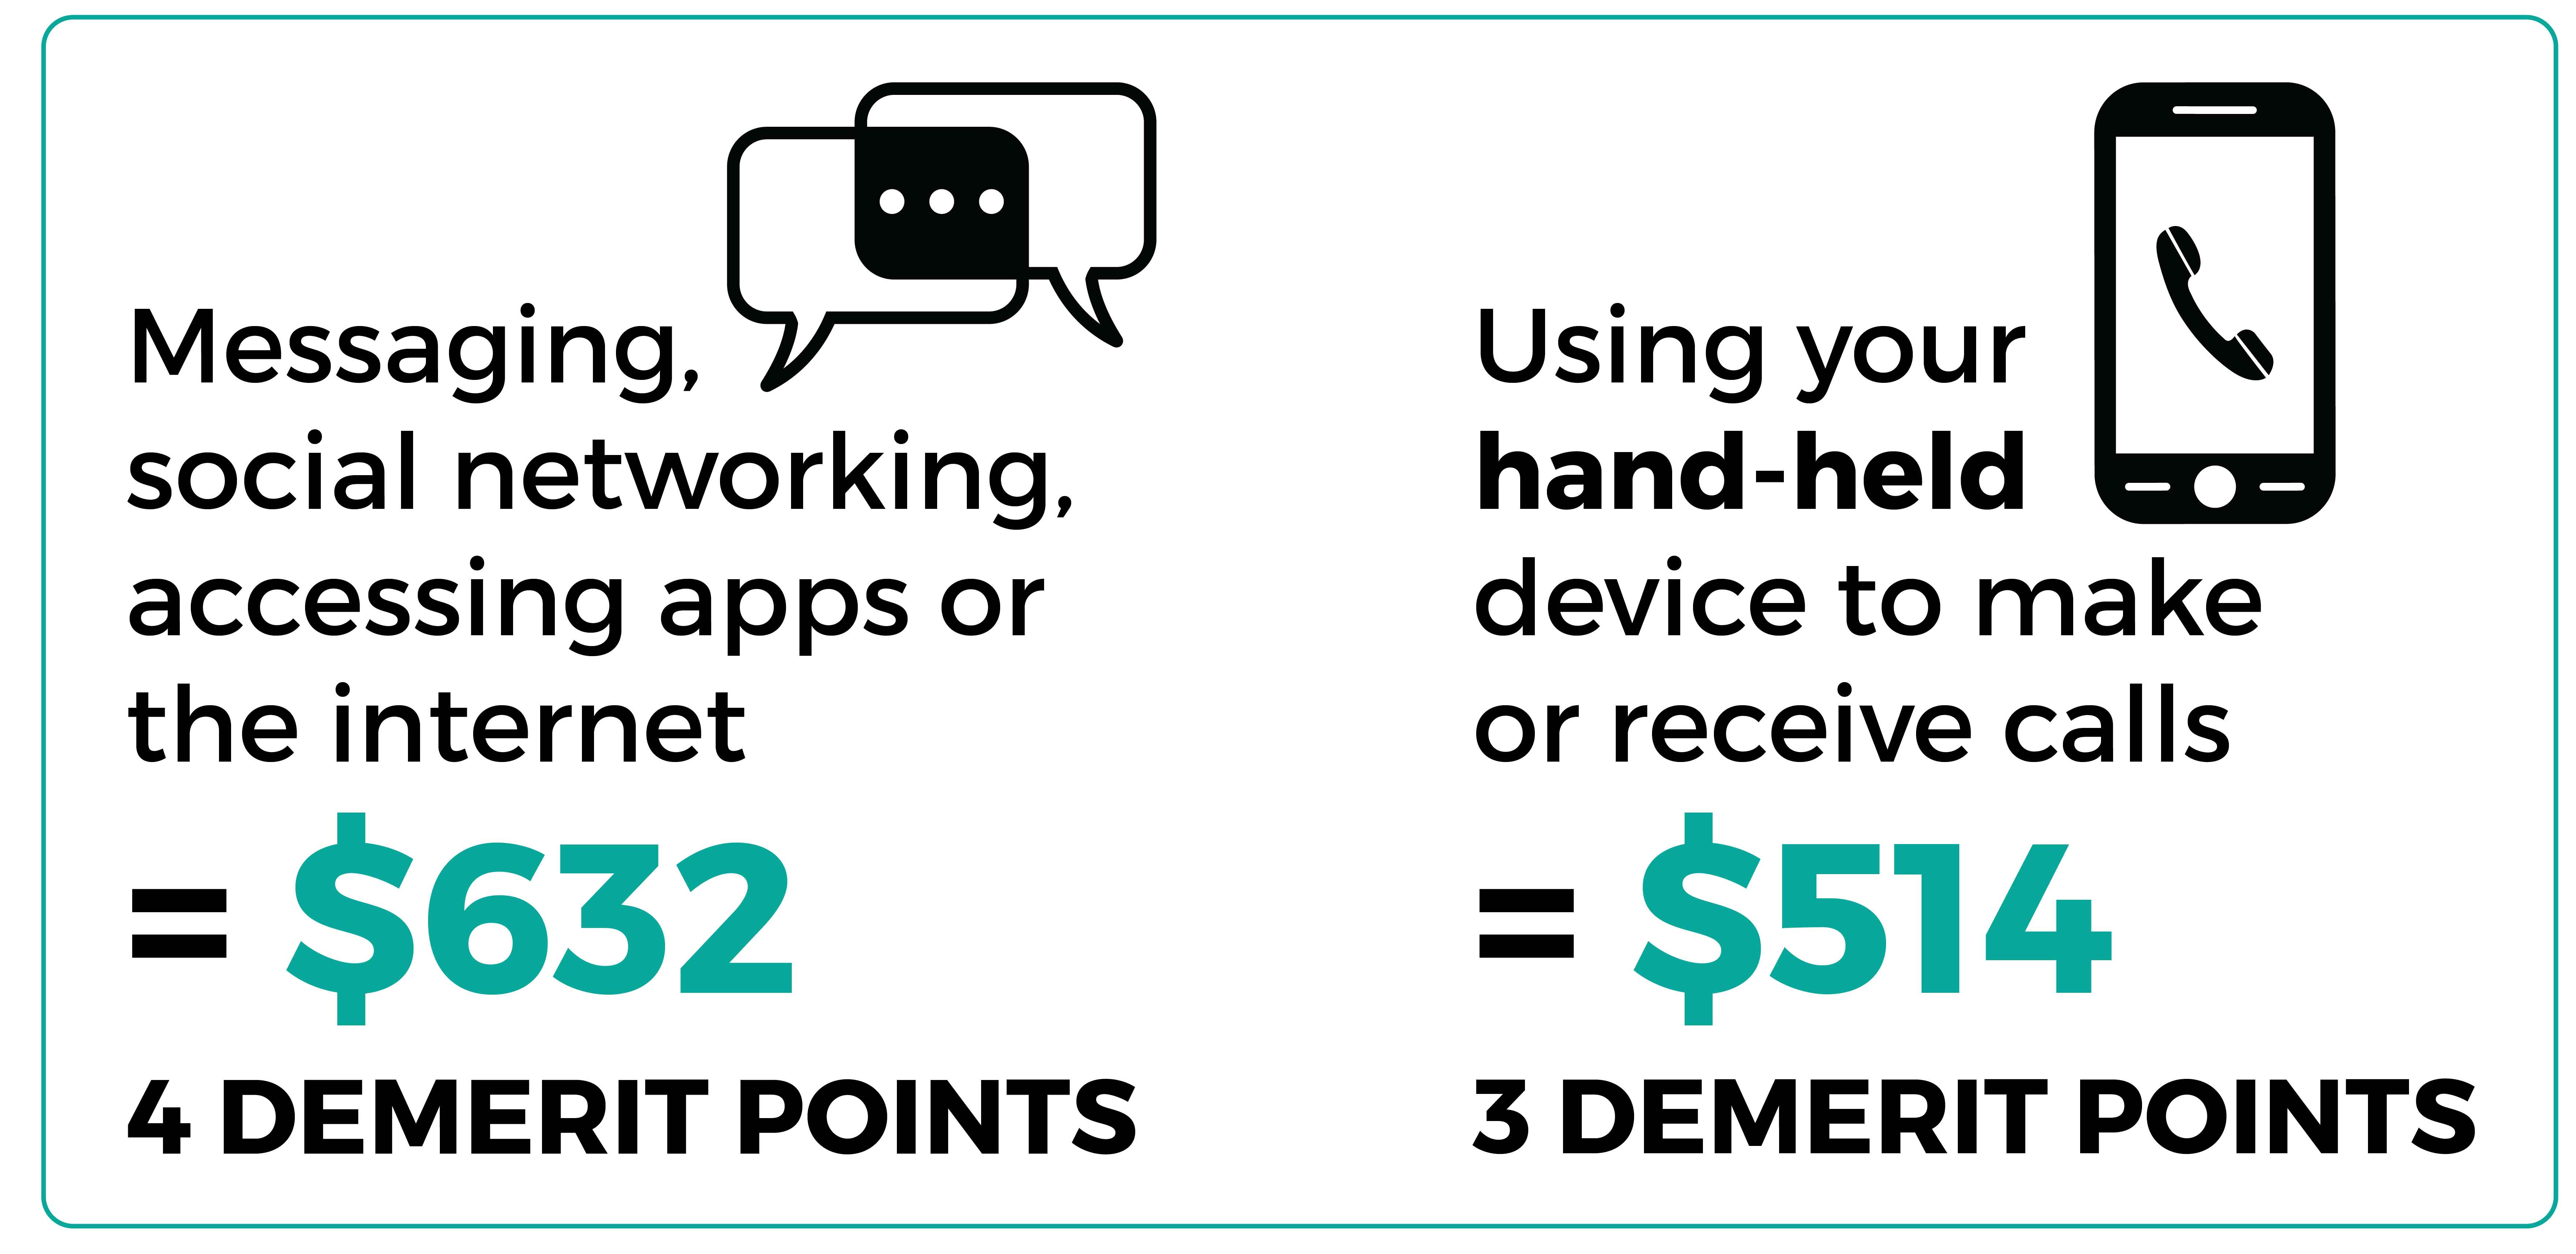 Messaging, social networking, accessing apps or the internet equals $632 and 4 demerit points. Using your hand-held device to make or receive calls equals $514 and 3 demerit points.